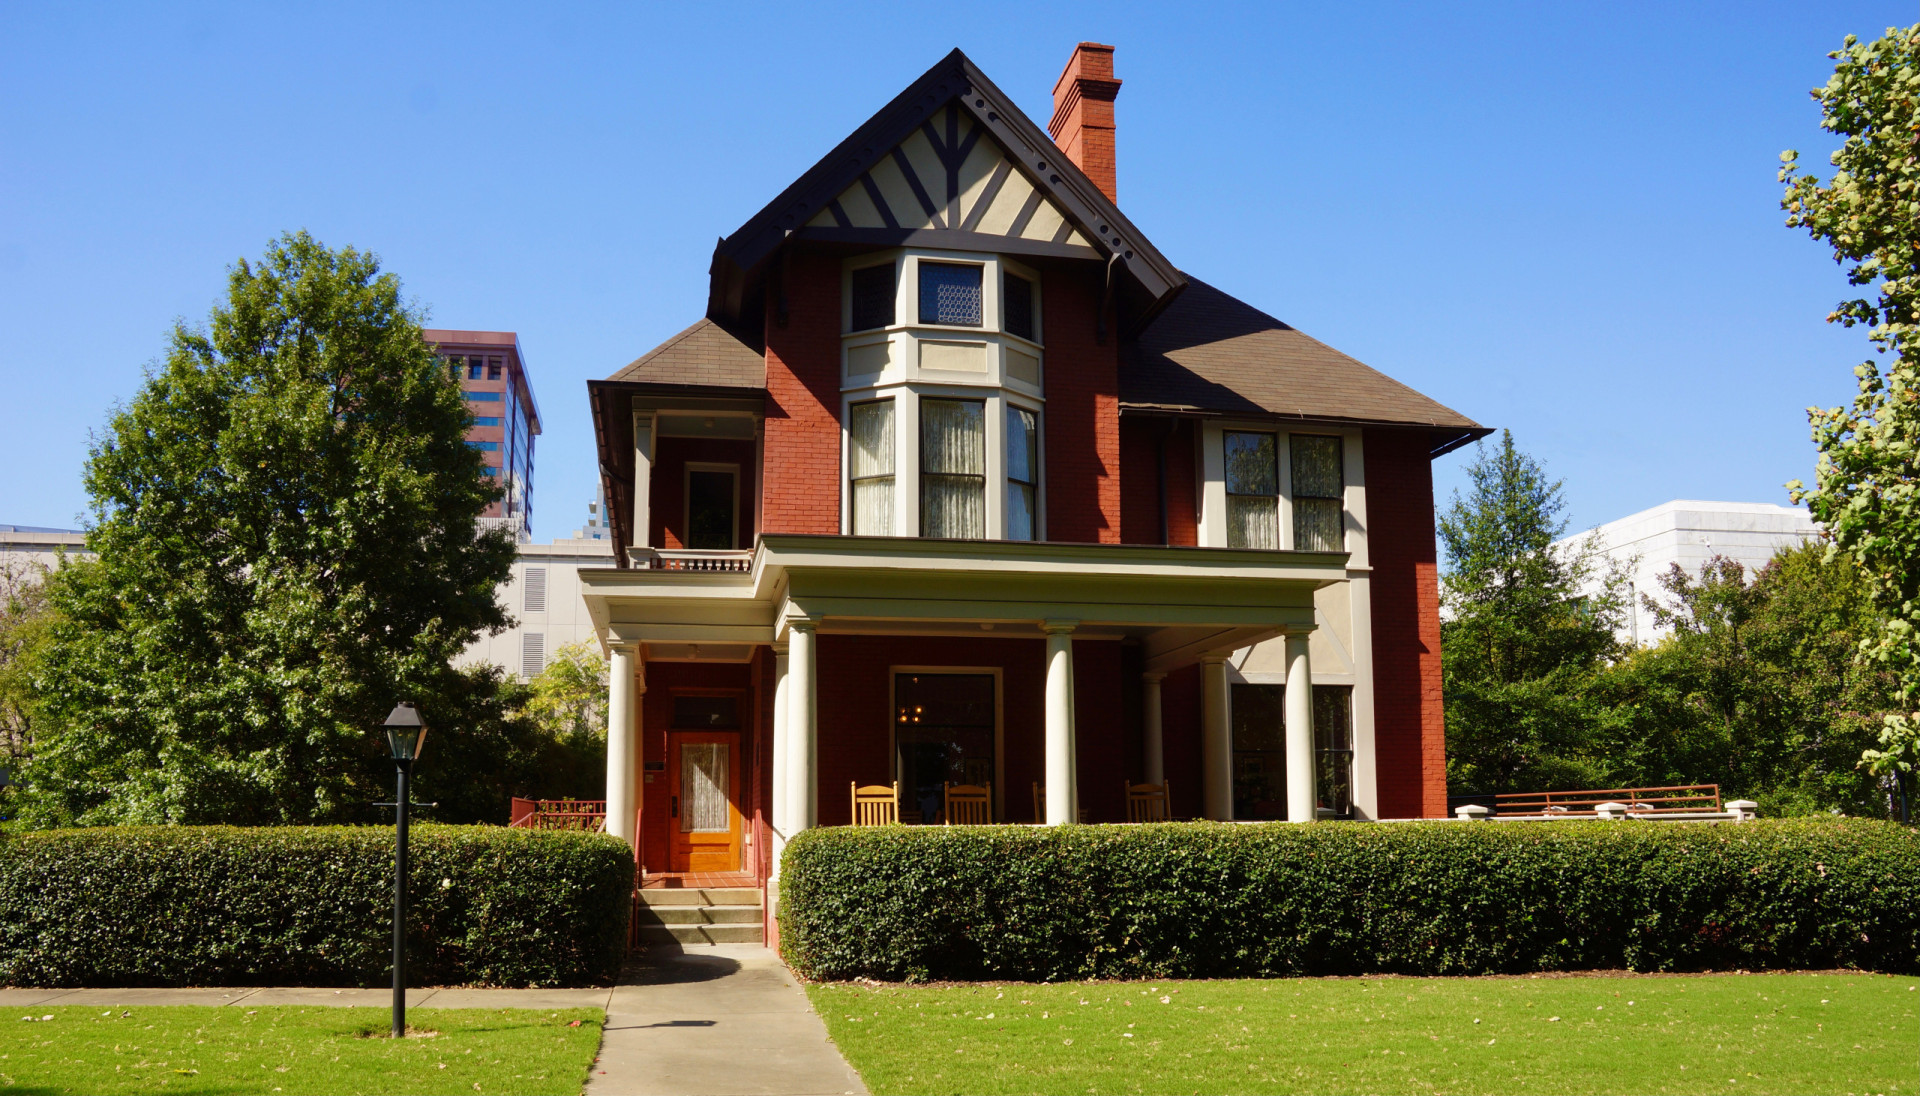 <p>'Gone with the Wind' by Margaret Mitchell paints a vivid picture of historical Atlanta during the Civil War. Visitors can step back in time by touring the Margaret Mitchell House, where she wrote the novel. </p><p>You may also like:<a href="https://www.starsinsider.com/n/412072?utm_source=msn.com&utm_medium=display&utm_campaign=referral_description&utm_content=639745en-us"> The dark secrets of the British royal family</a></p>